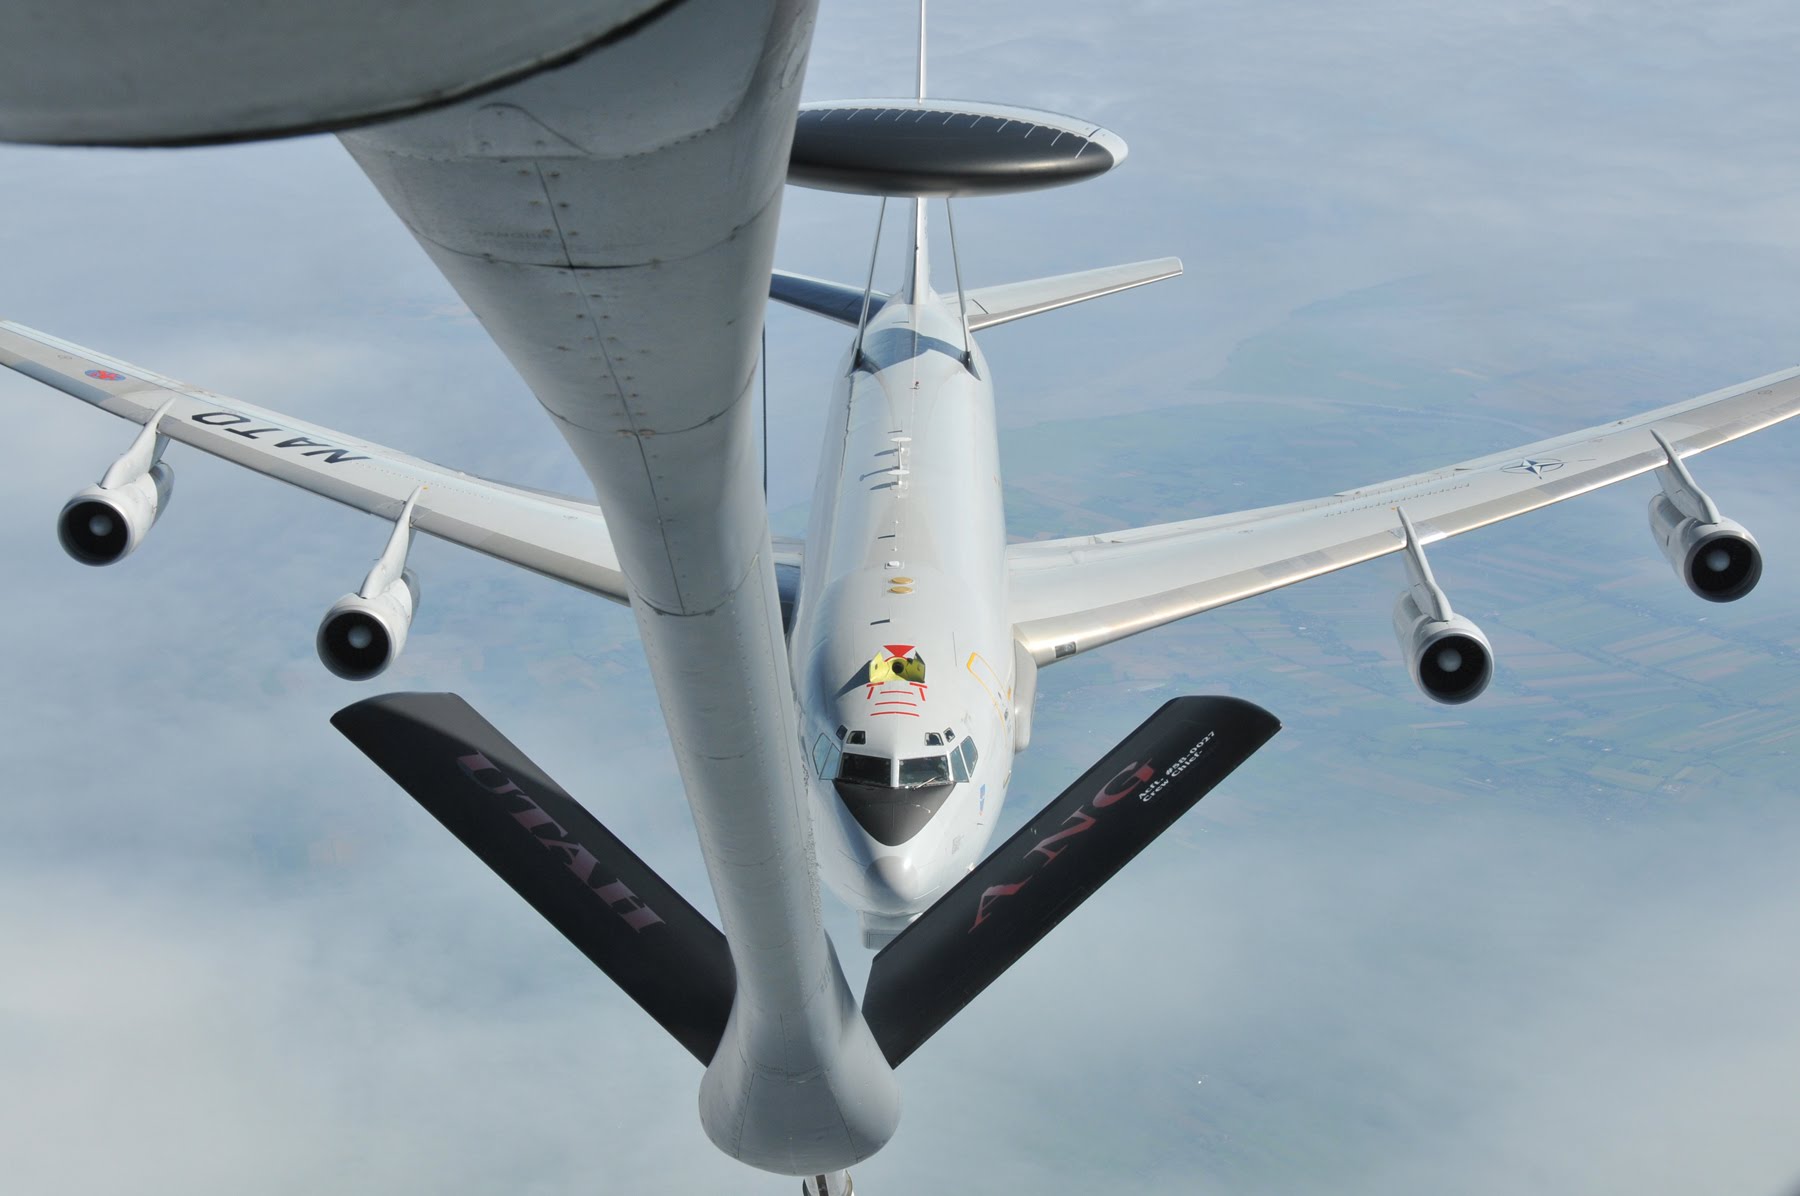 Watch Two Military Airplanes Almost Collide During Mid Air Refueling